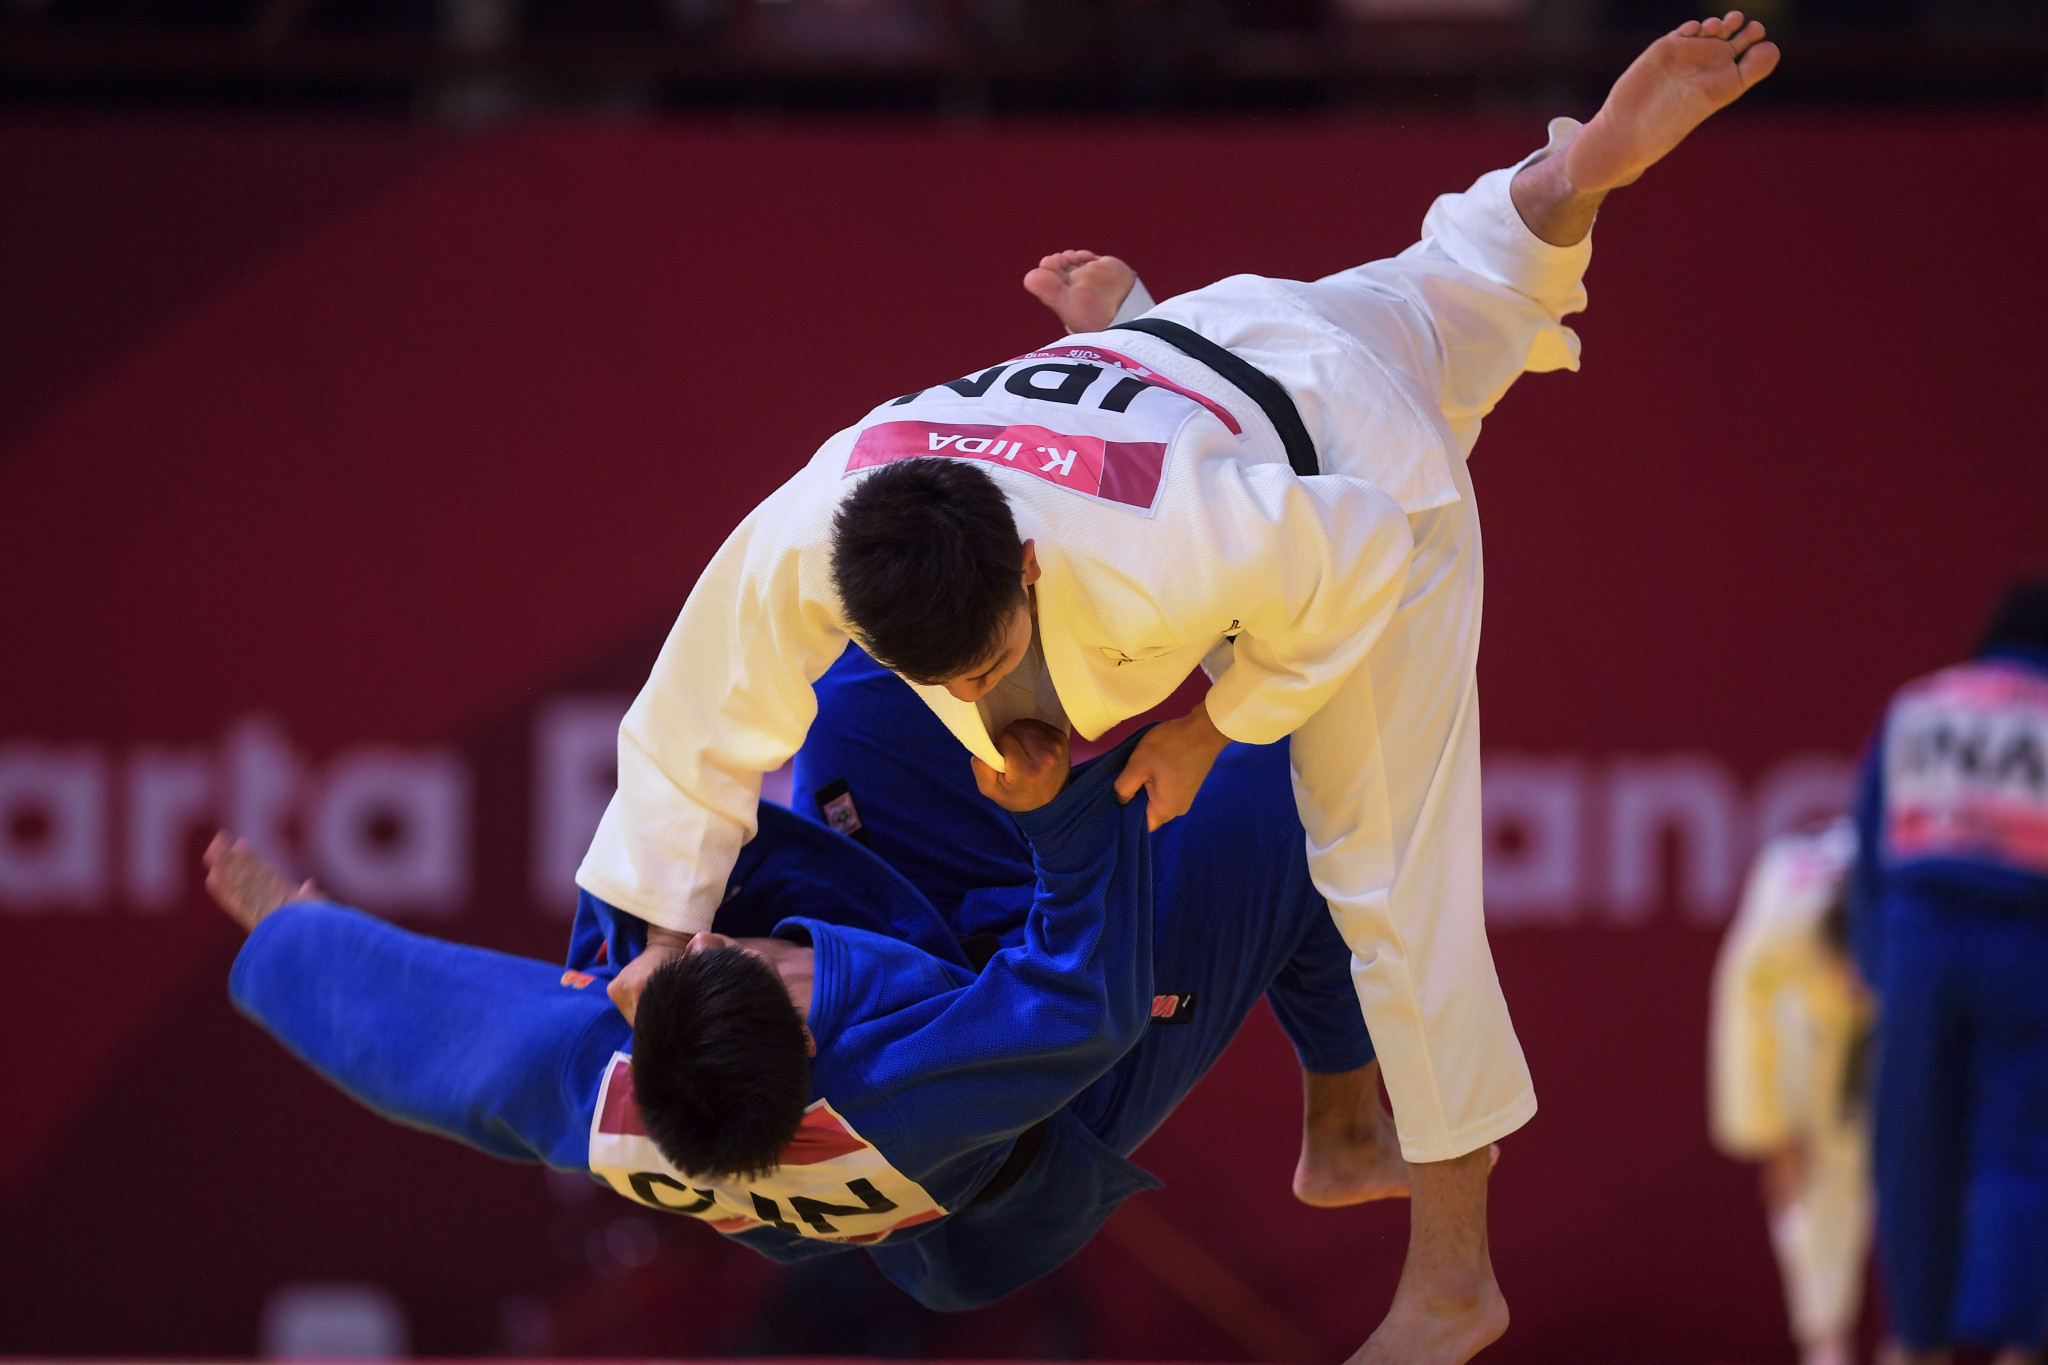 The partnership between the IJF and the ITA starts immediately and runs until Tokyo 2020 ©Getty Images